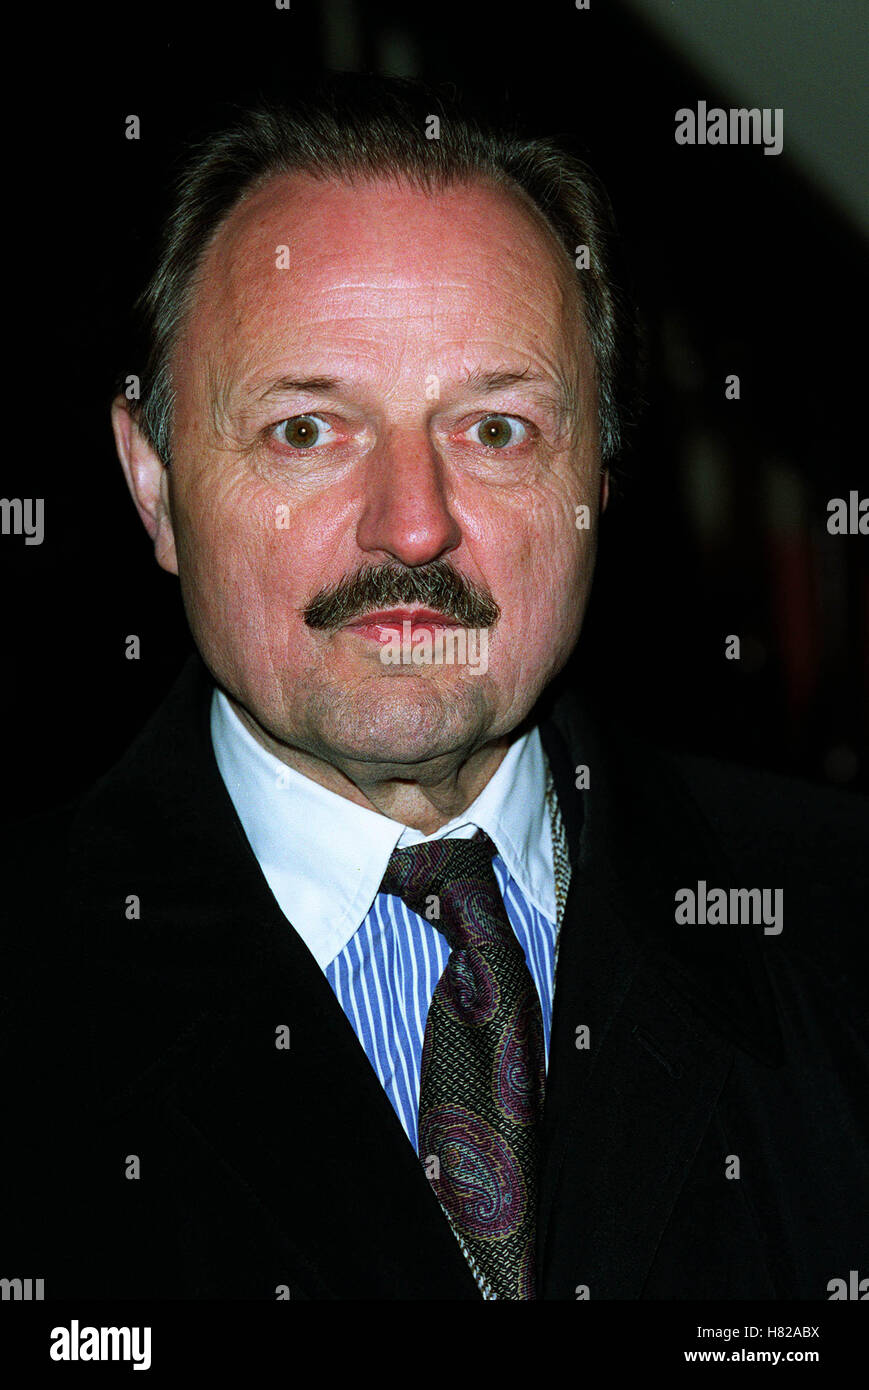 PETER BOWLES LONDON ENGLAND 26 March 2000 Stock Photo